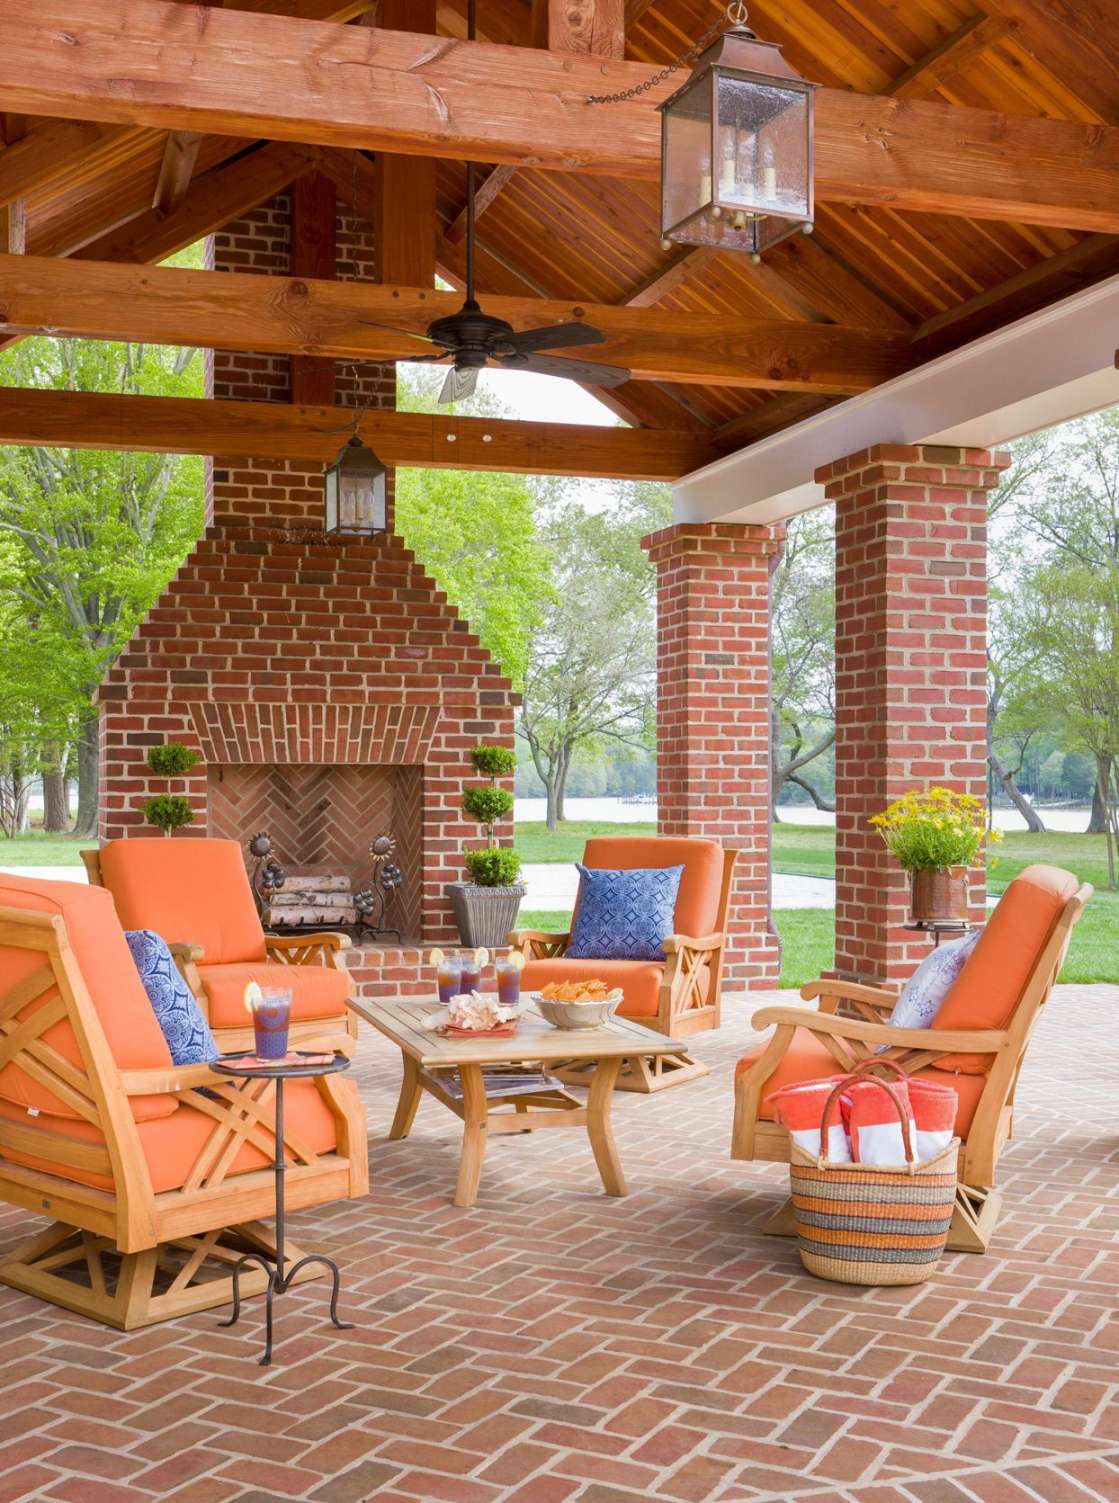 Cozy Outdoor Fireplace Ideas for a Cool-Weather Hangout Space